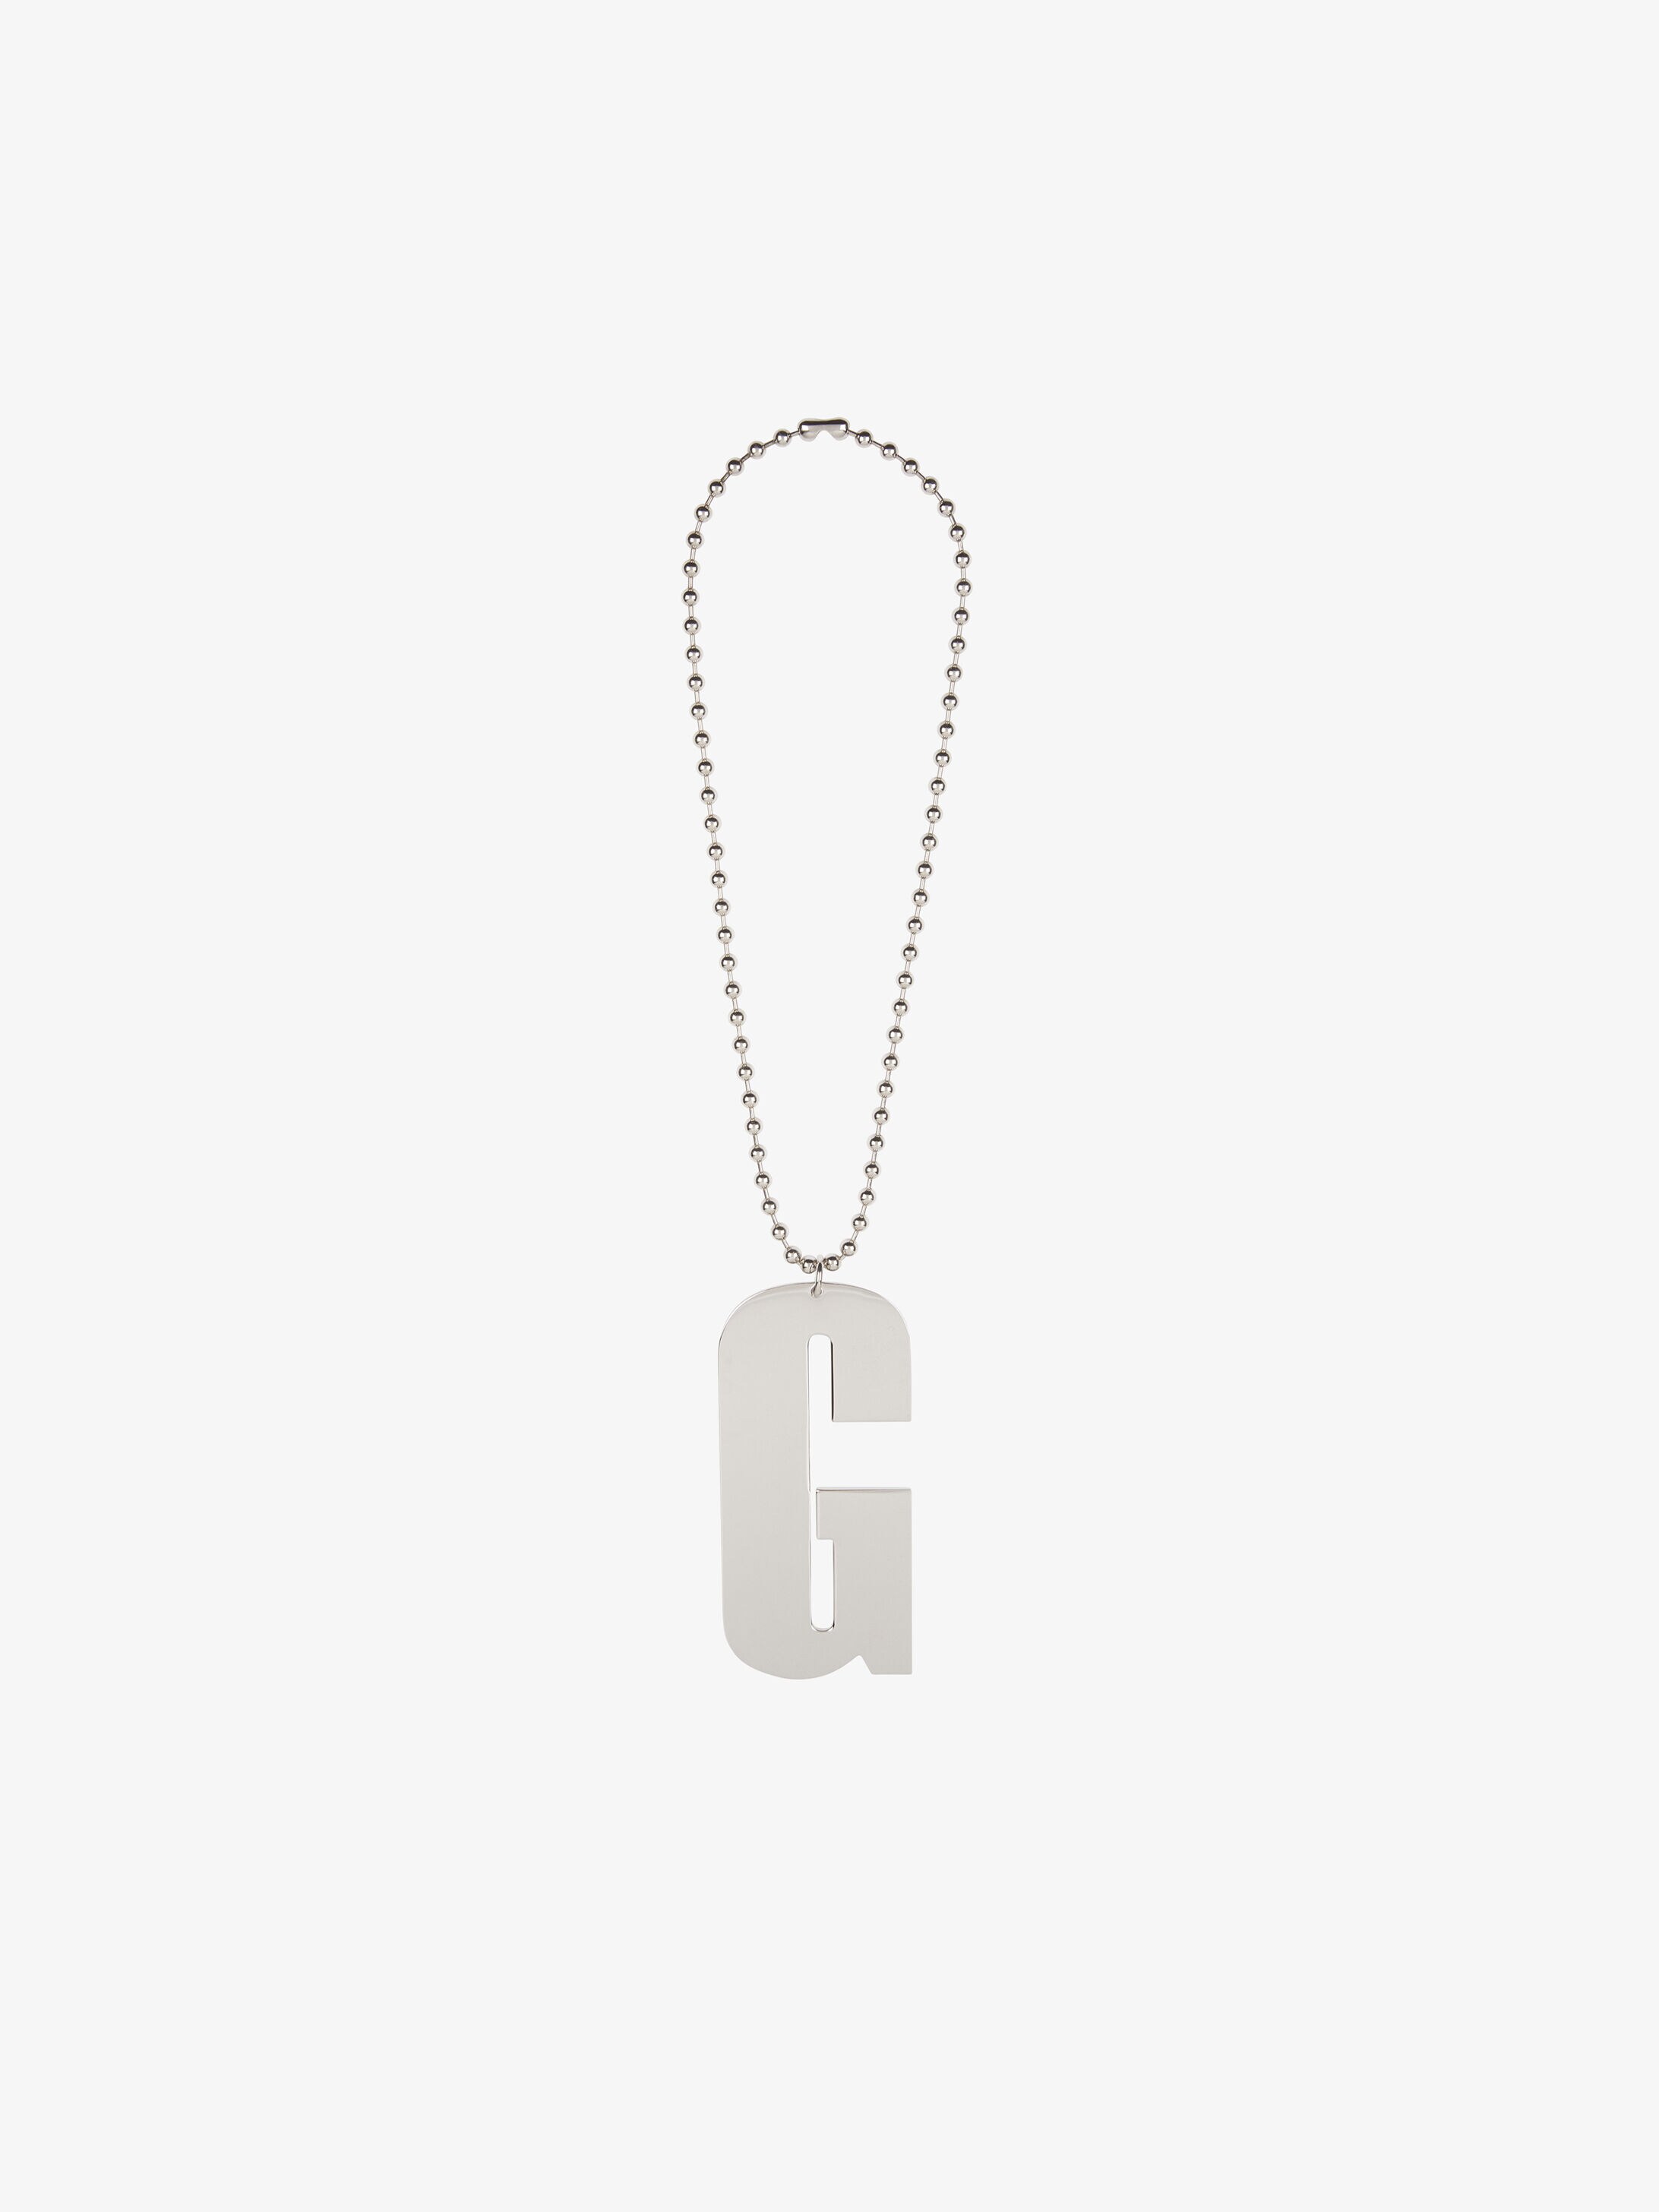 G necklace in silver metal | GIVENCHY Paris